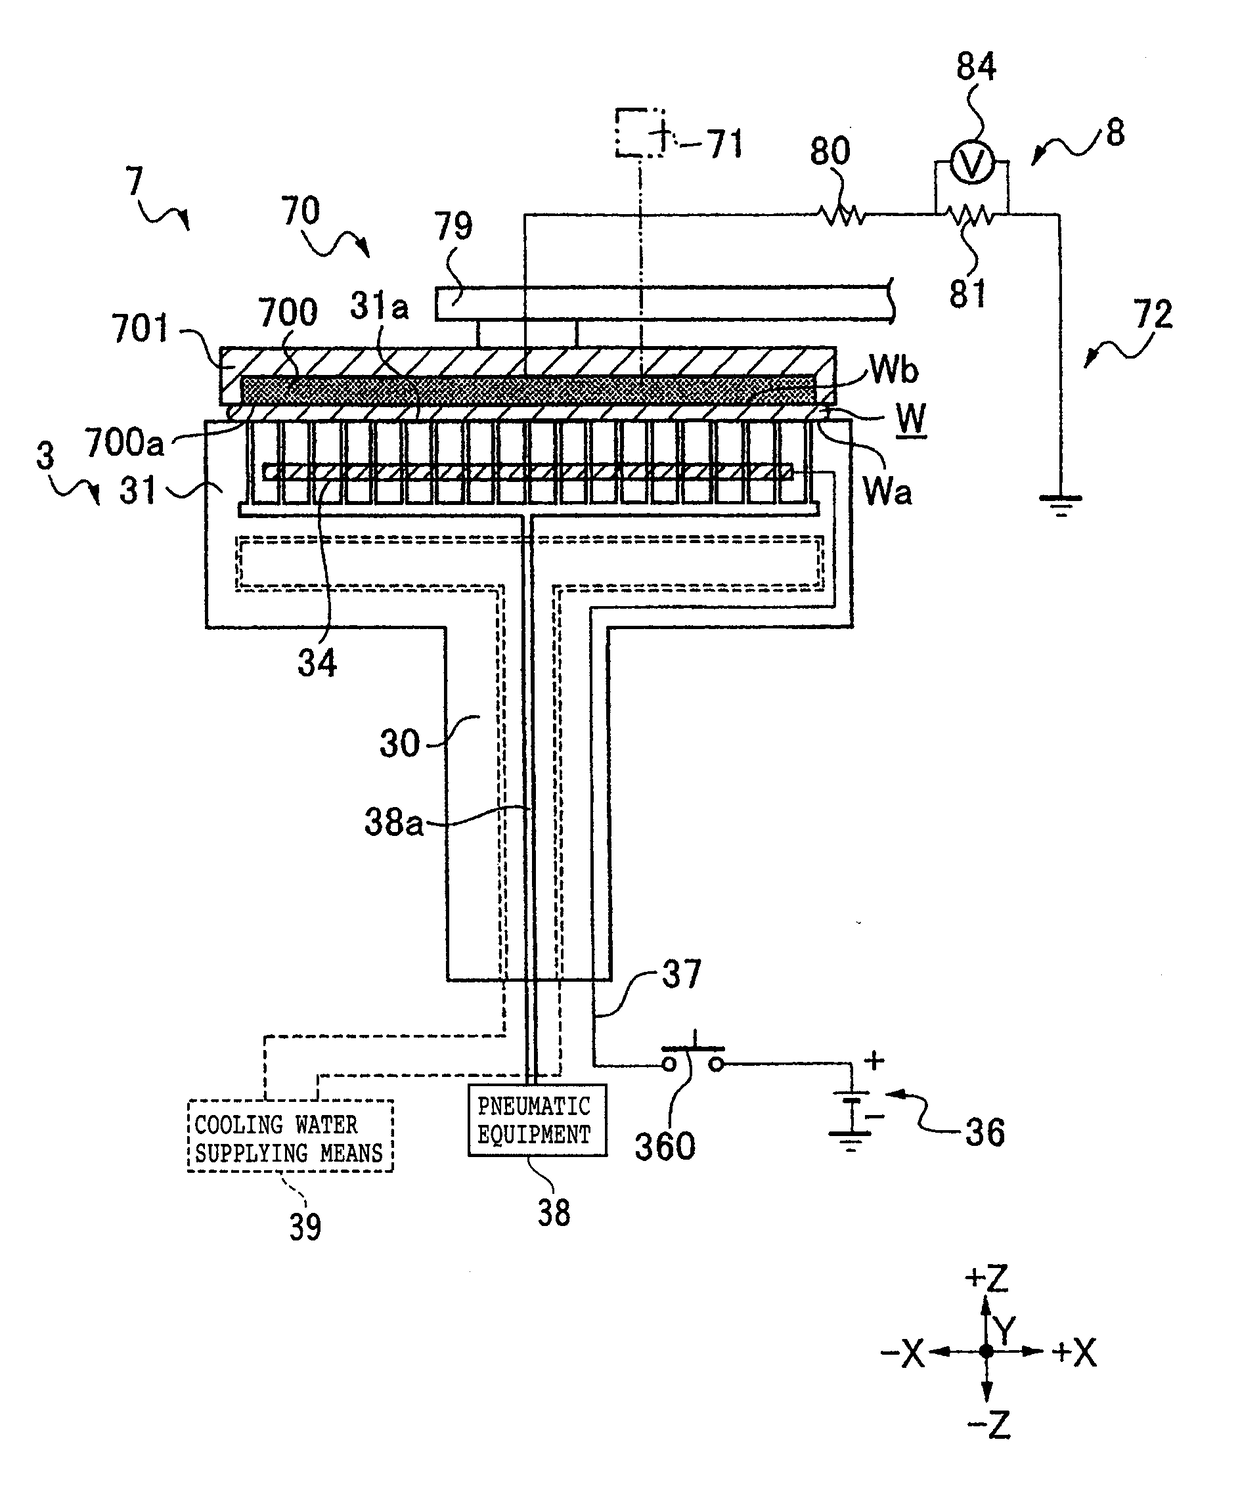 Hold checking method and unhold checking method for wafer